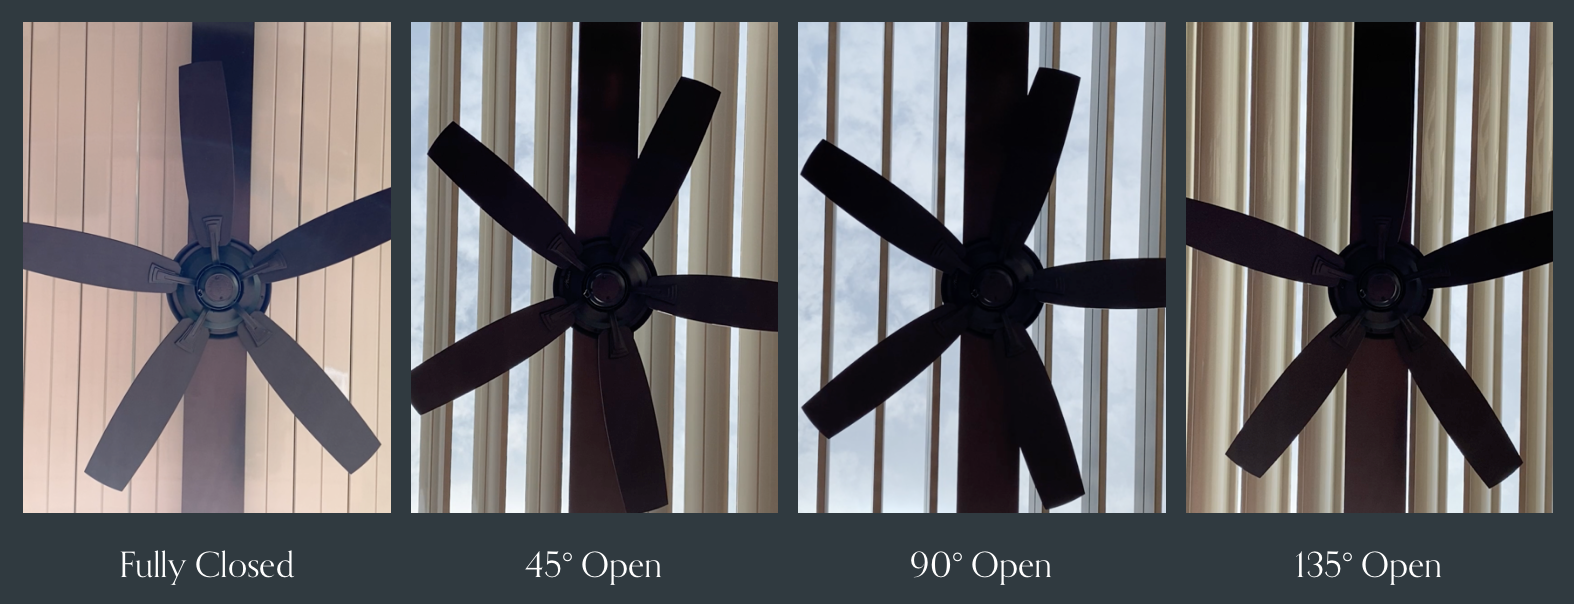 Ceiling Fans on a louvered roof with various degrees of the roof being open